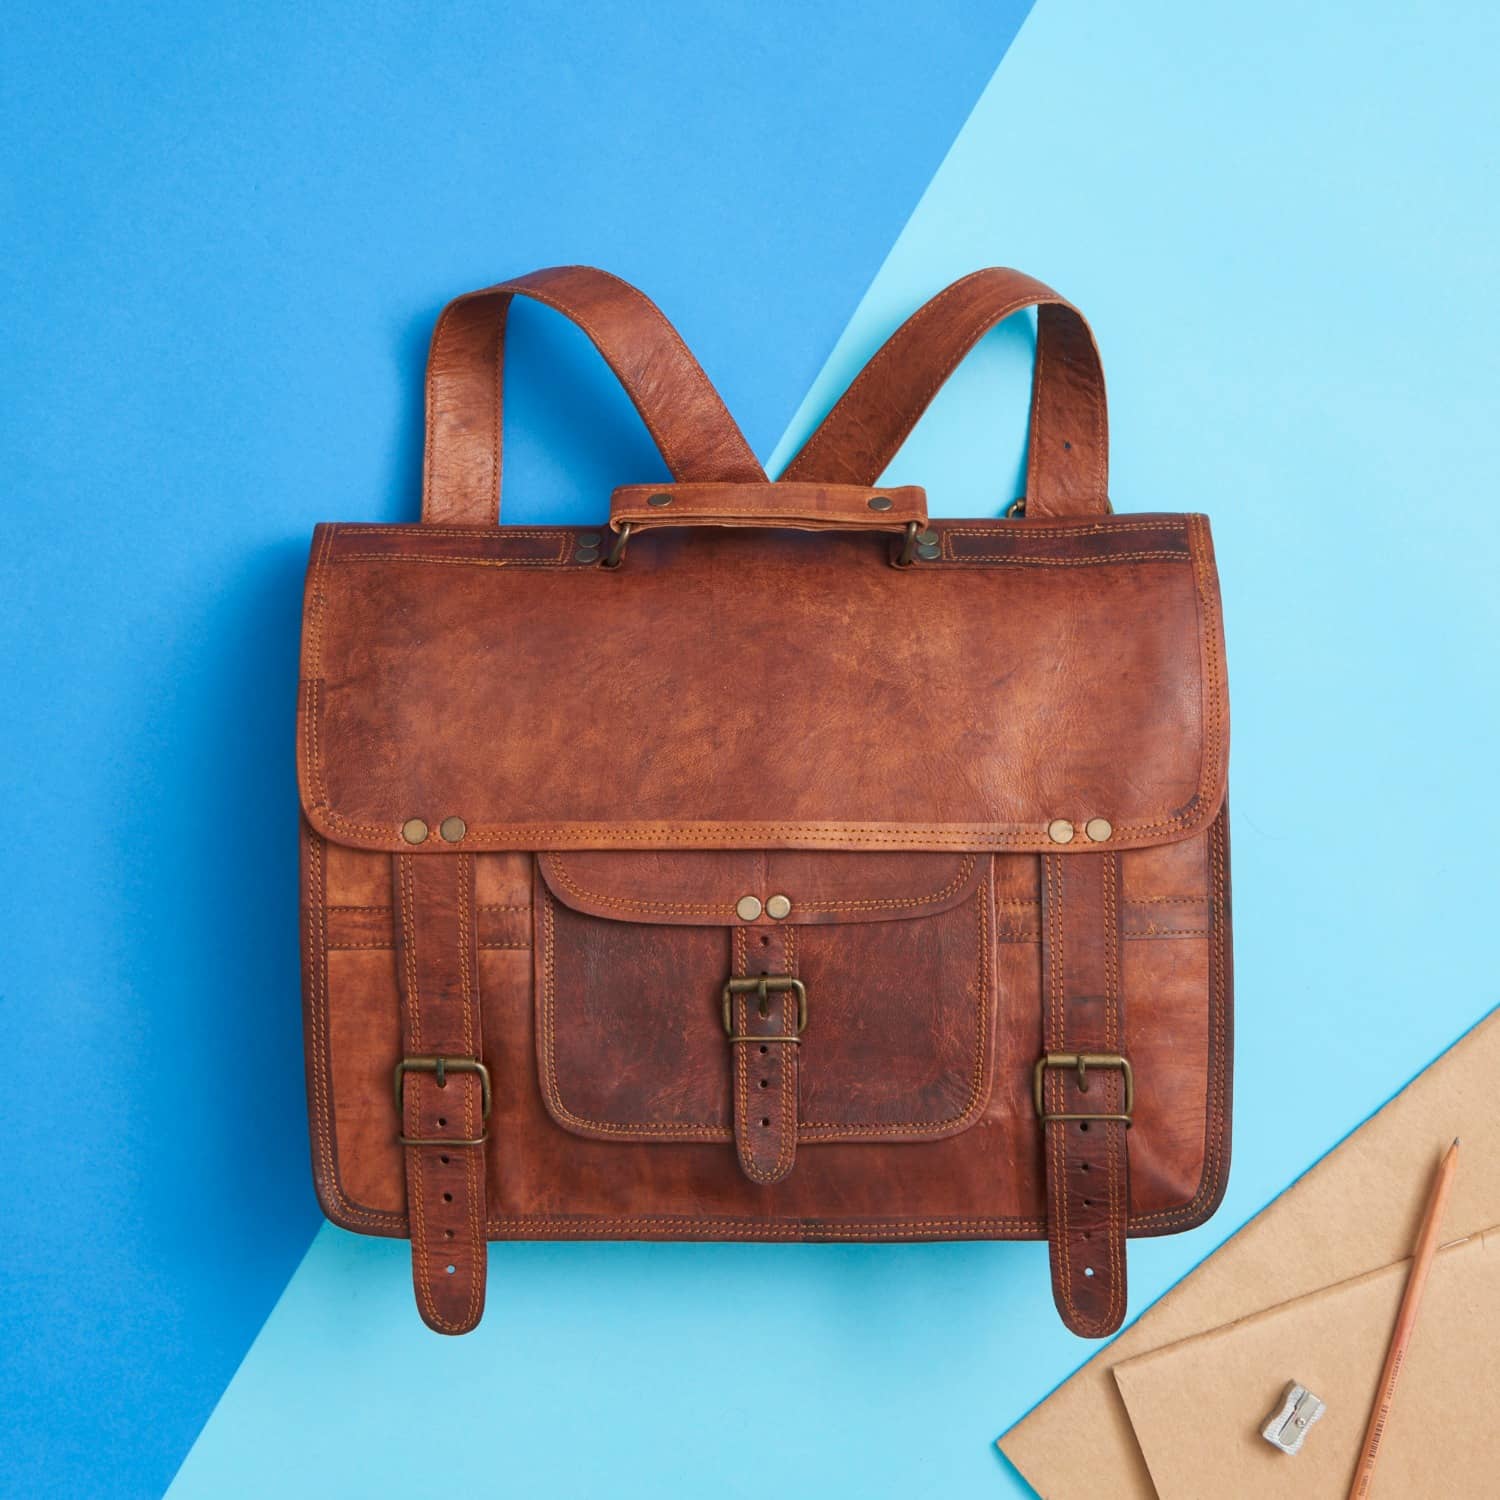 Beautiful, Vintage-Inspired Leather Bags and Accessories. – Vida Vida Leather  Bags & Accessories